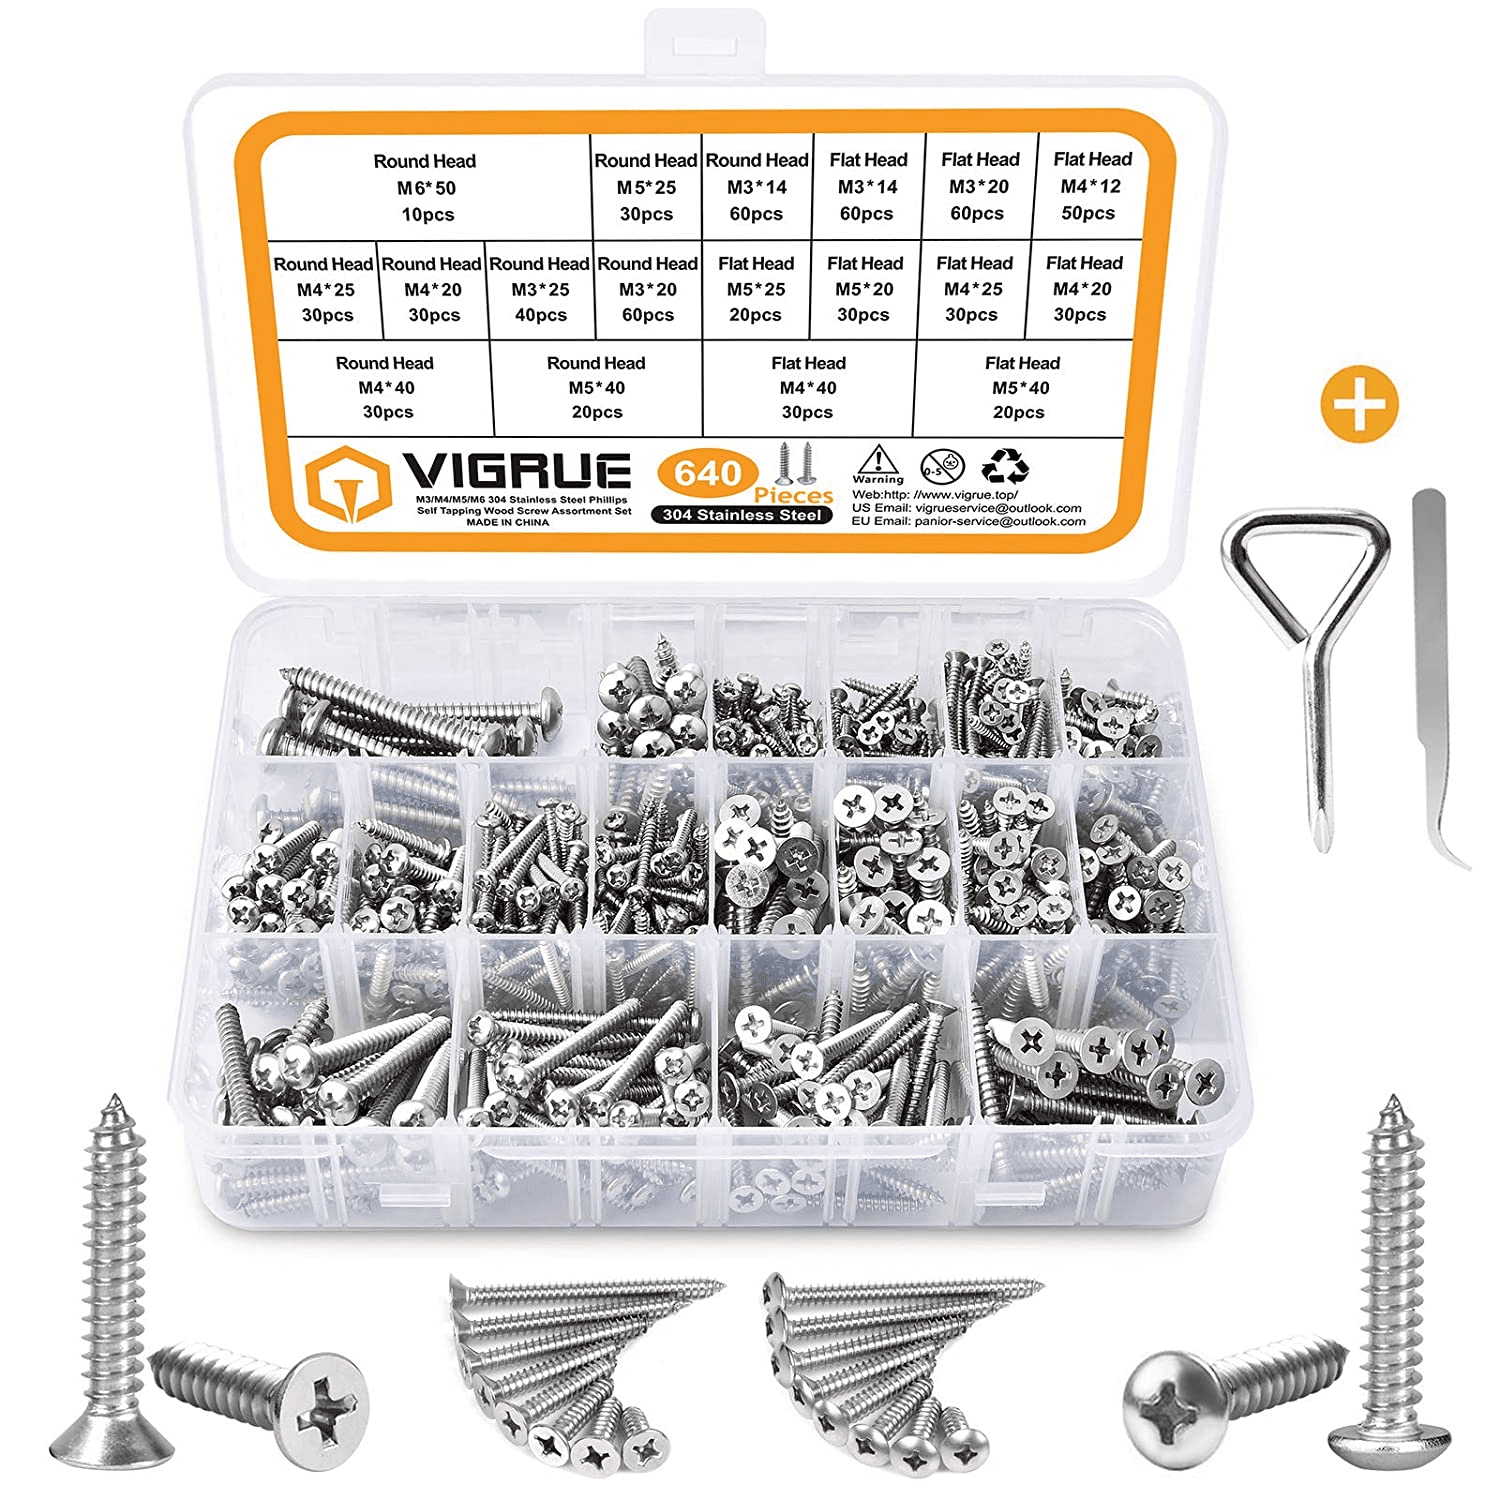 Box of 550 Assorted Trim Screws Stainless Steel Pozi Flange Self Tapping Screws 